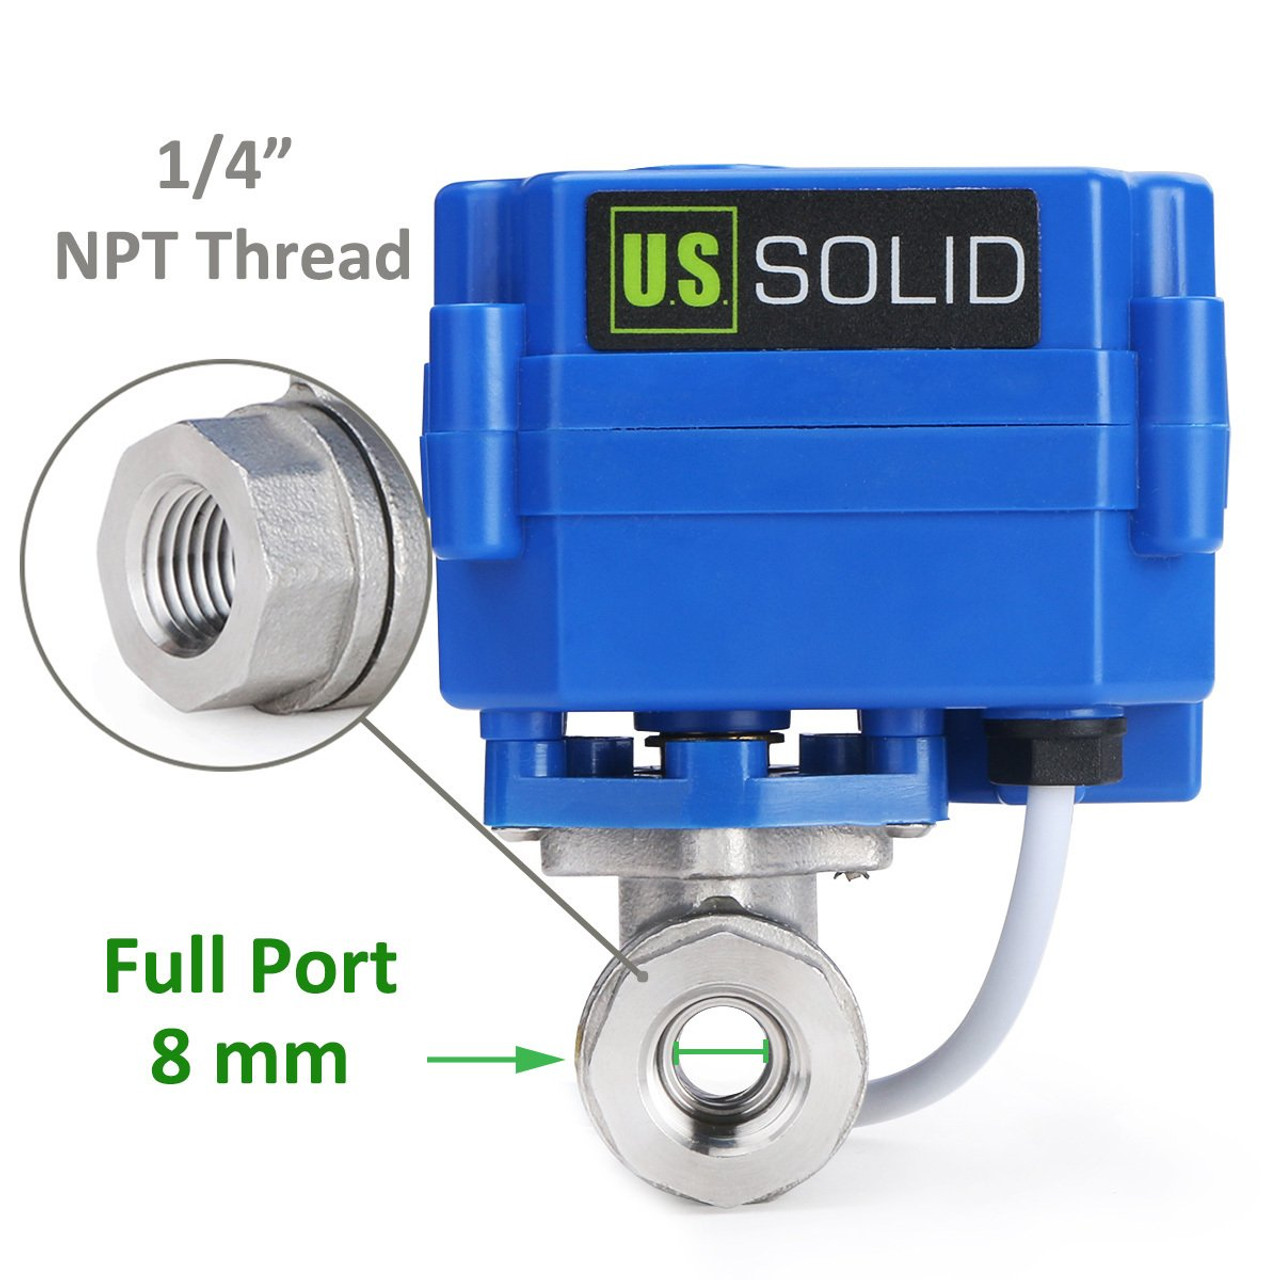 U.S. Solid Motorized Ball Valve- 1/4” Stainless Steel Electrical Ball Valve with Full Port, 9-24 V AC/DC, 2 Wire Auto Return